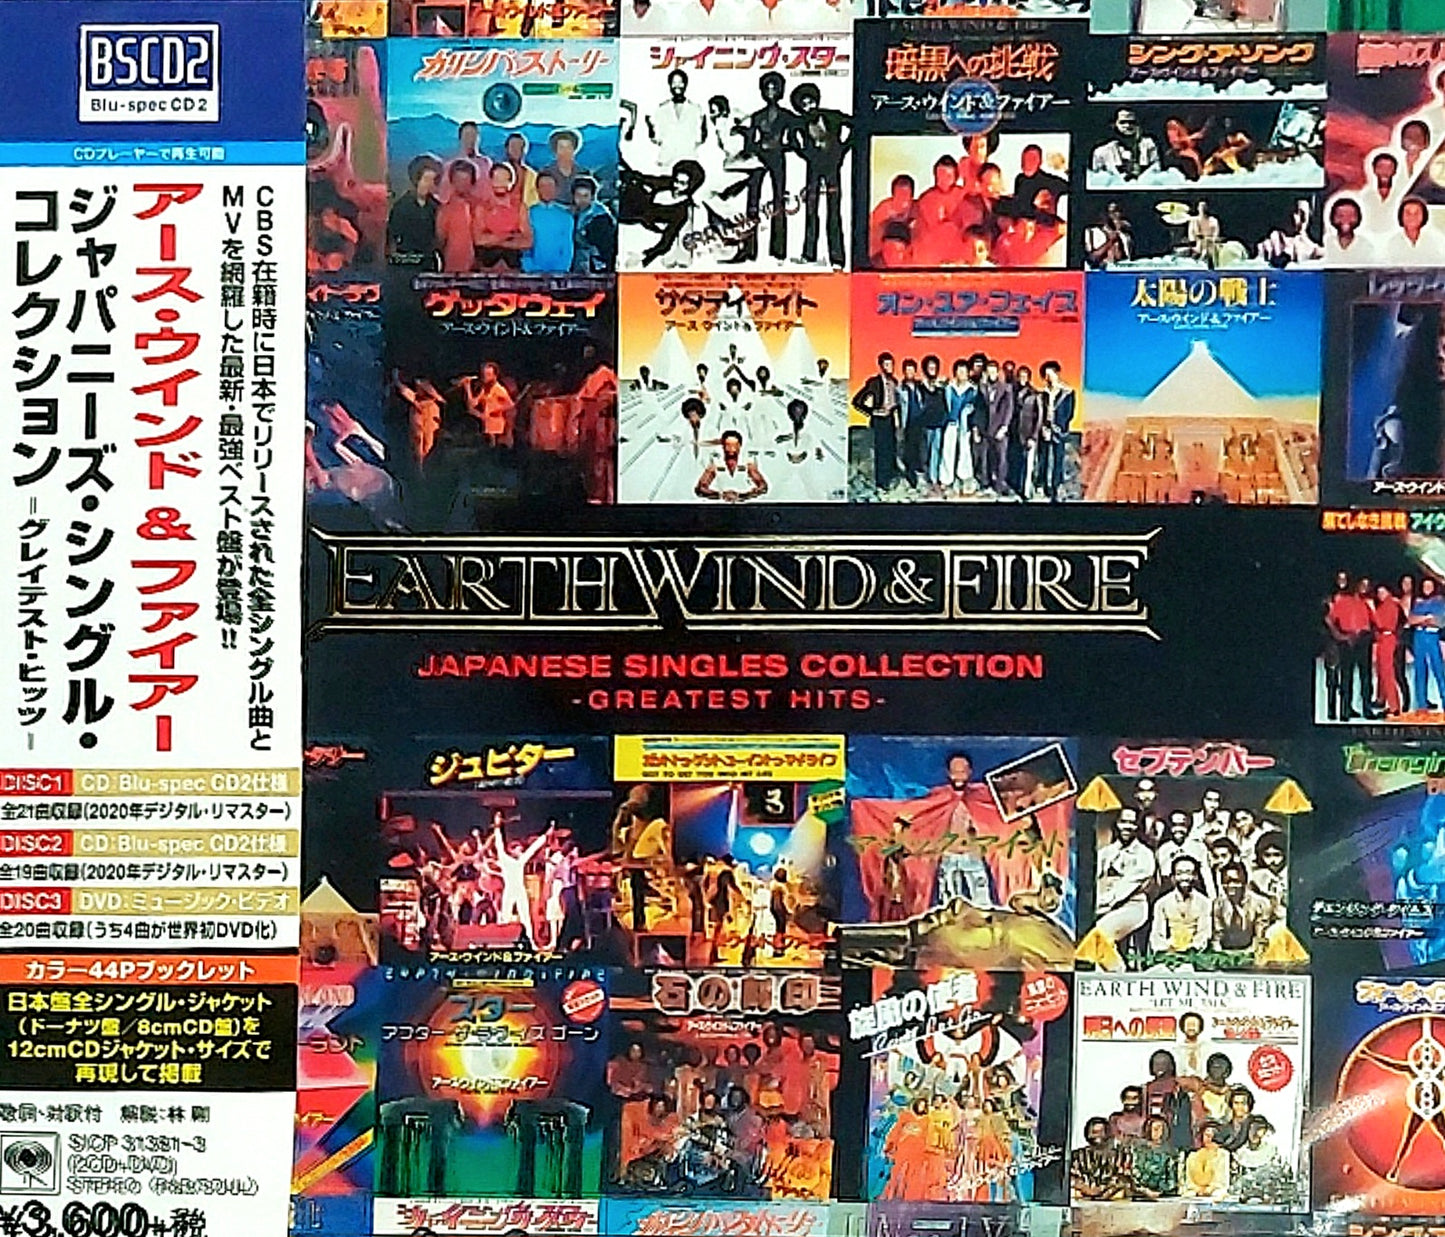 Earth Wind &amp; Fire: Greatest Hits - Japan Singles Collection 2xCD &amp; DVD